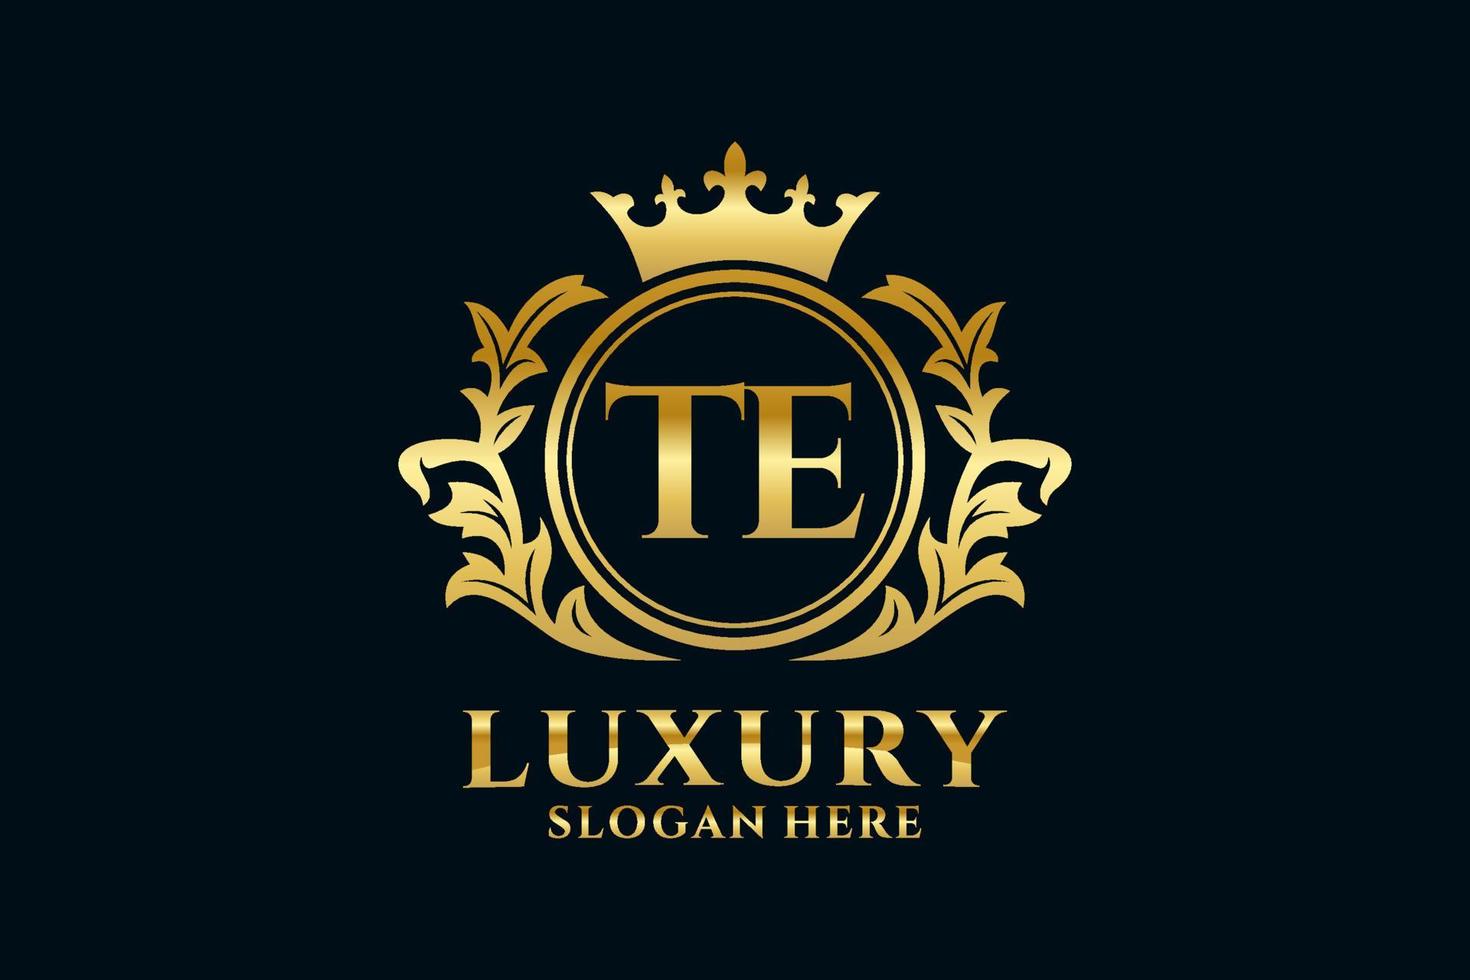 Initial TE Letter Royal Luxury Logo template in vector art for luxurious branding projects and other vector illustration.